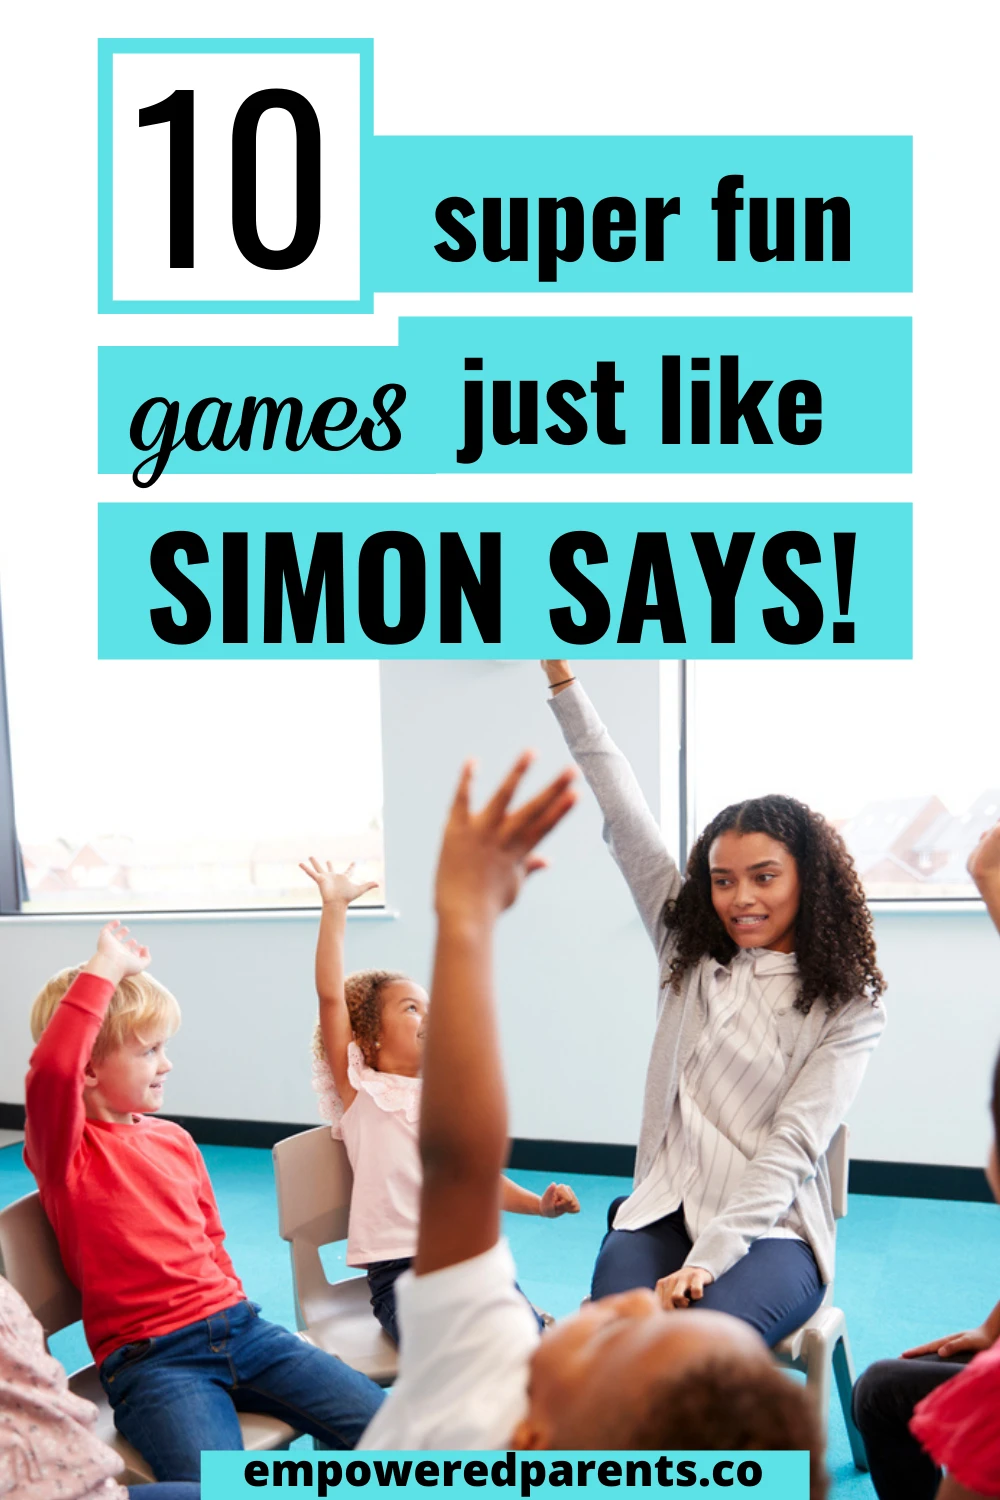 Children and teacher sitting in a circle,  raising hands together. Text reads "10 super fun games just like simon says".